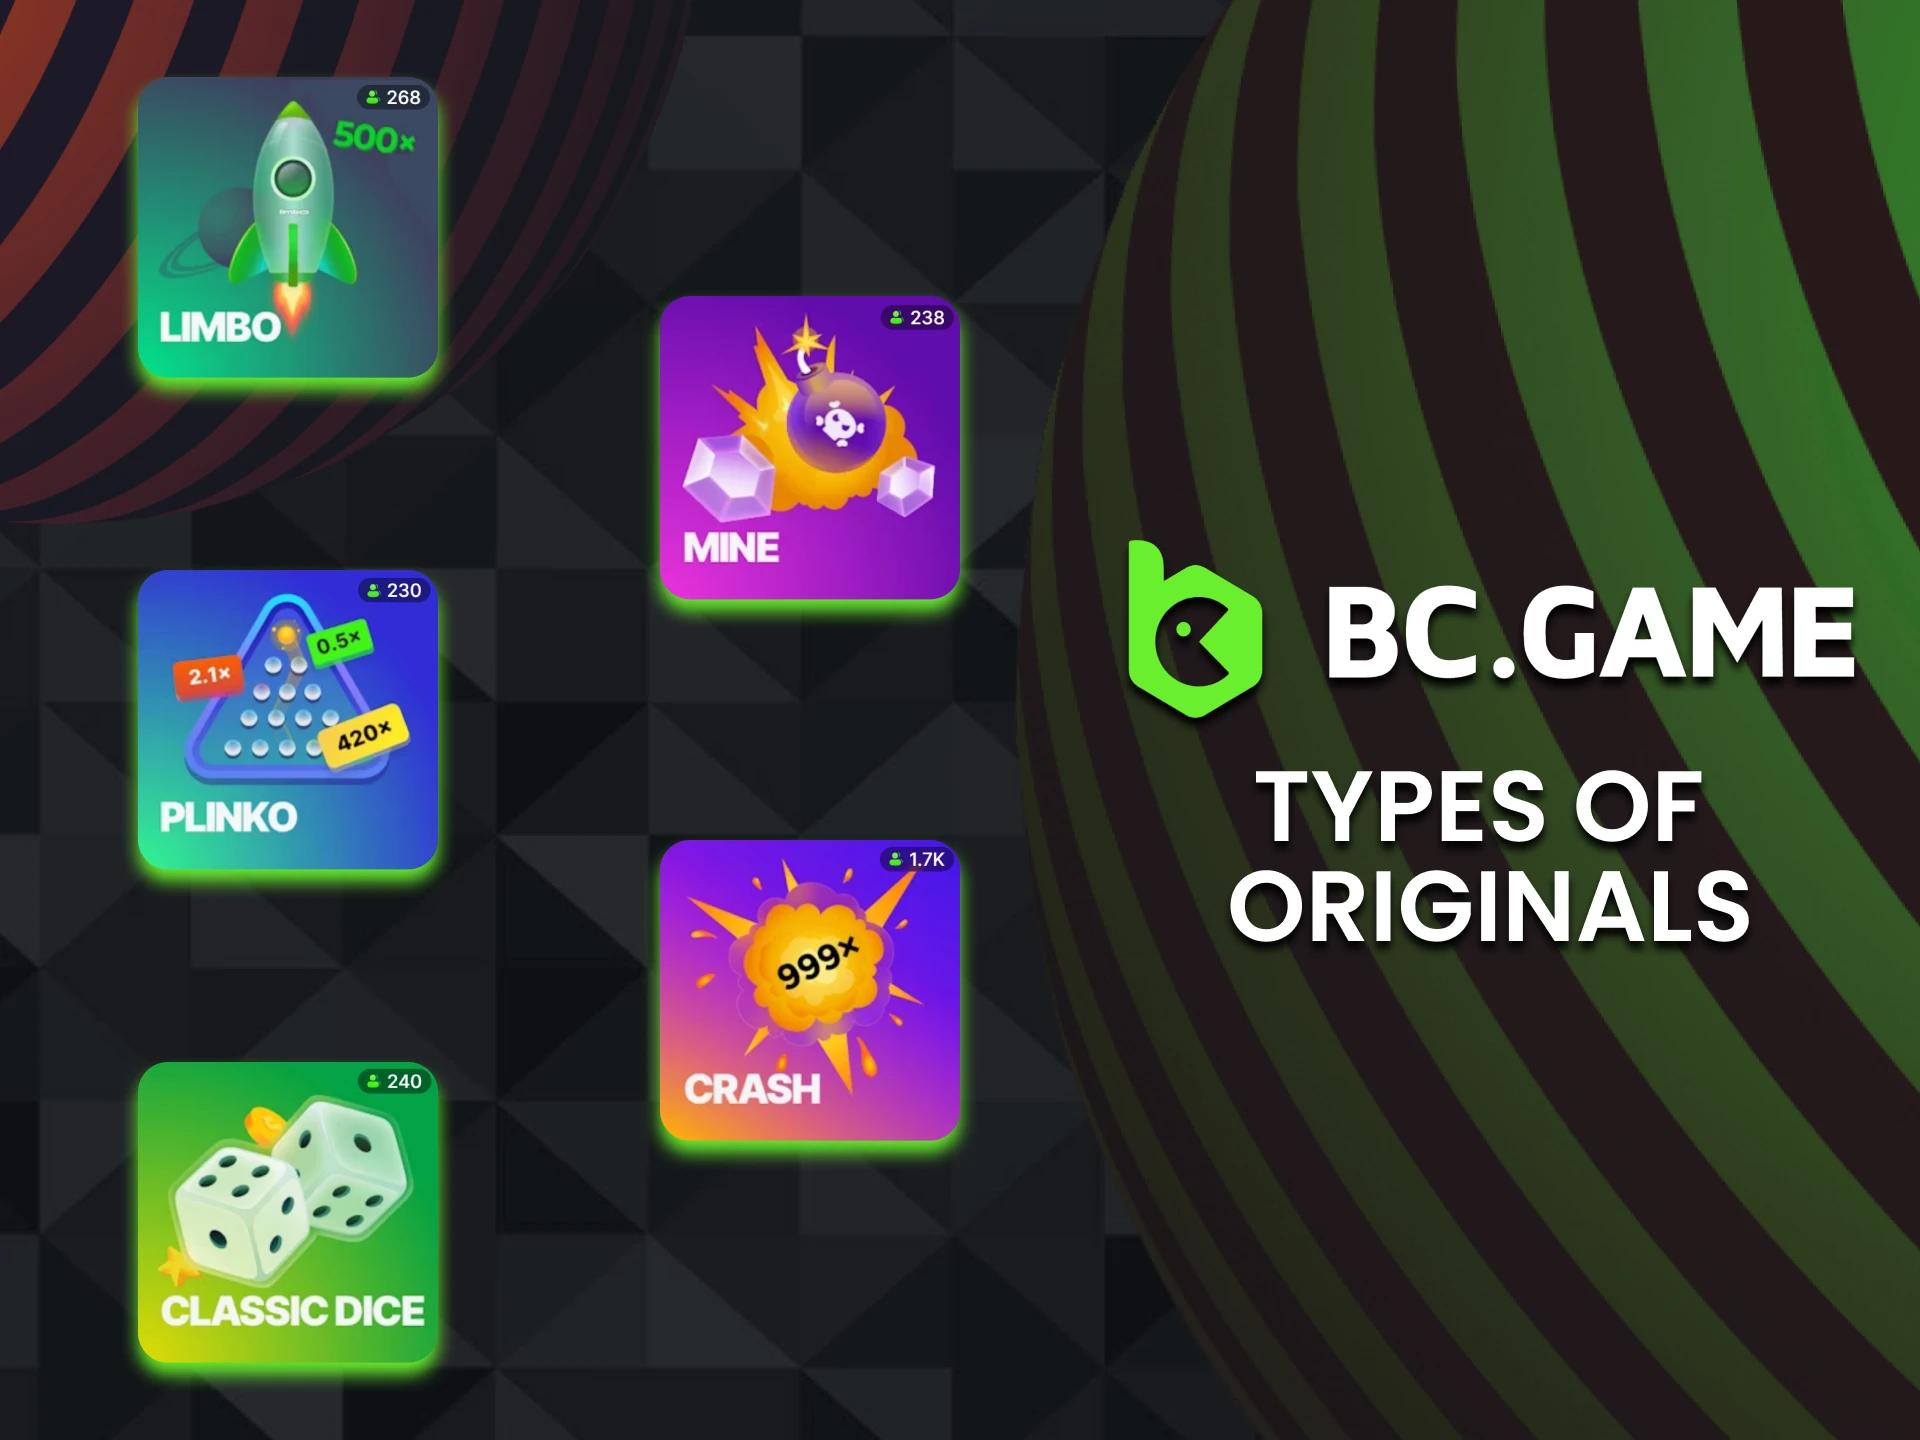 BC Originals section has many games from BC Game provider.